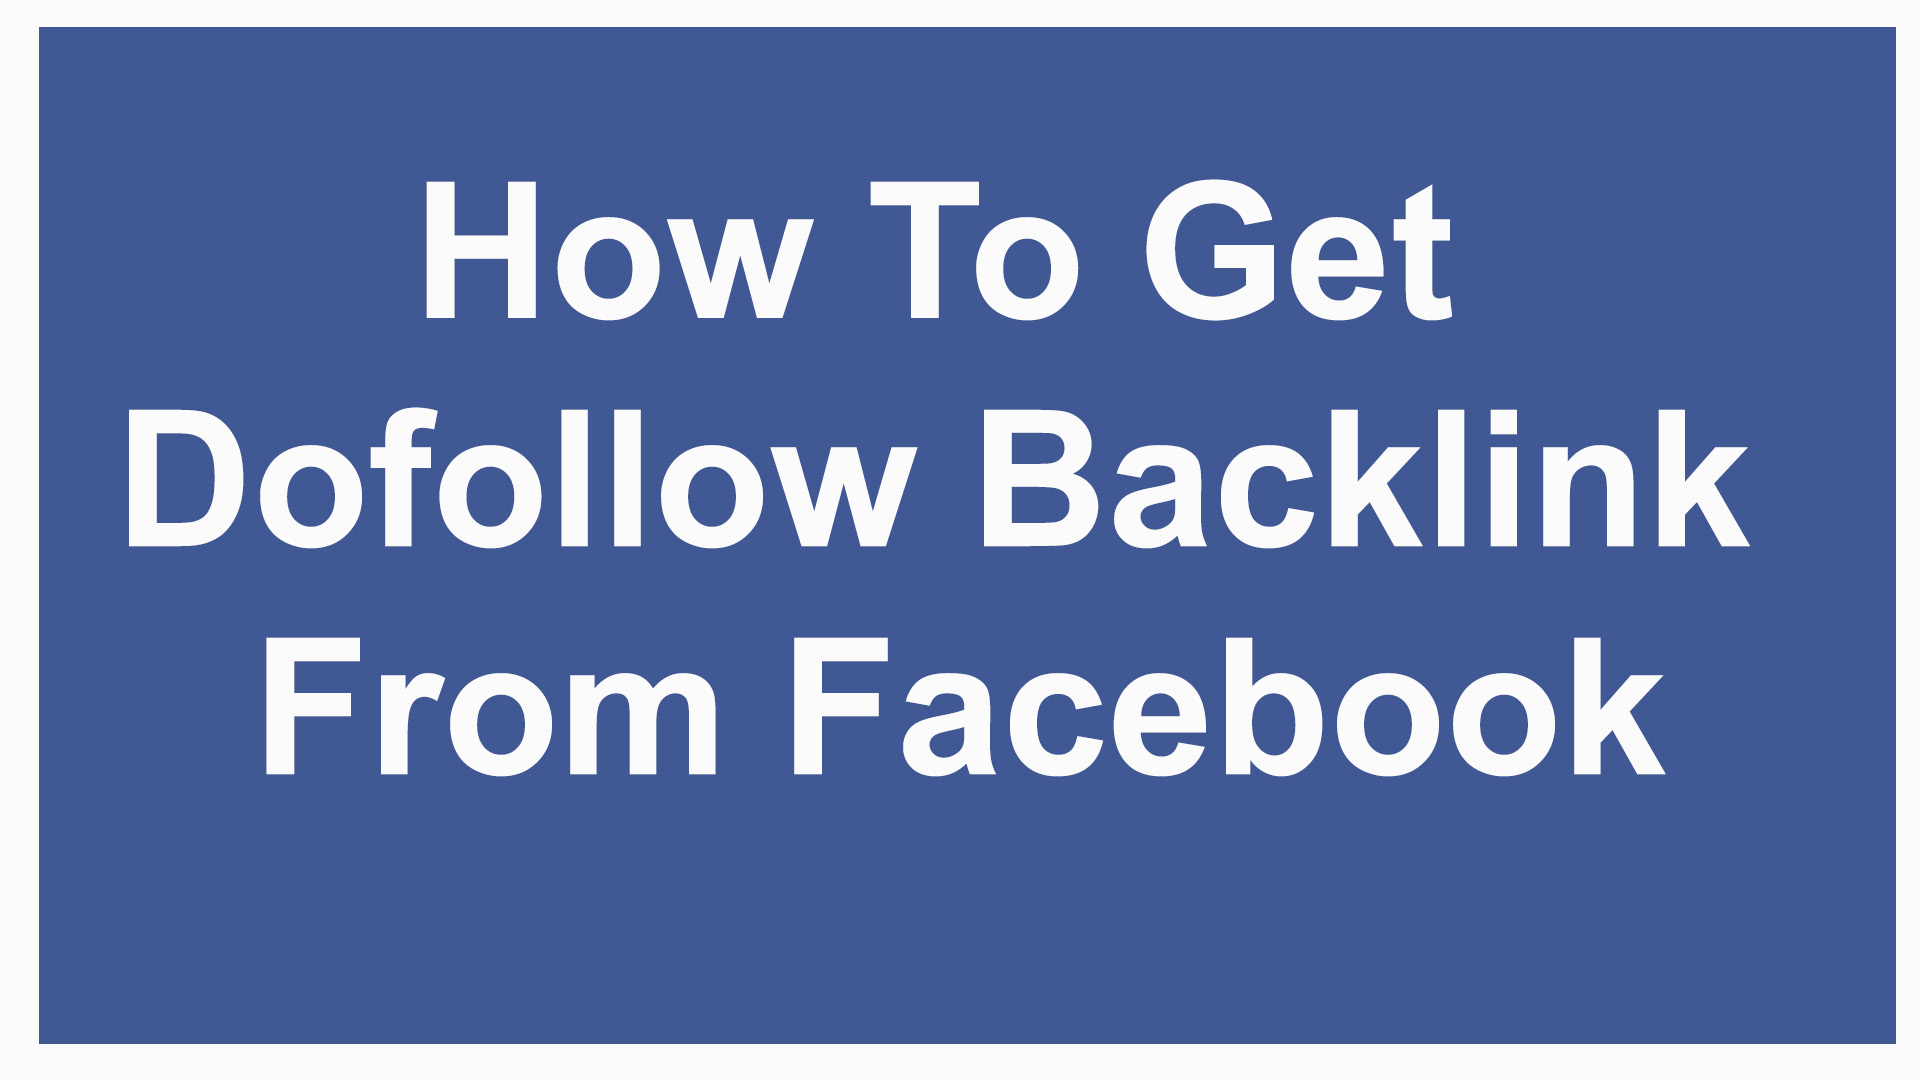 How To Get Dofollow Backlink From Facebook